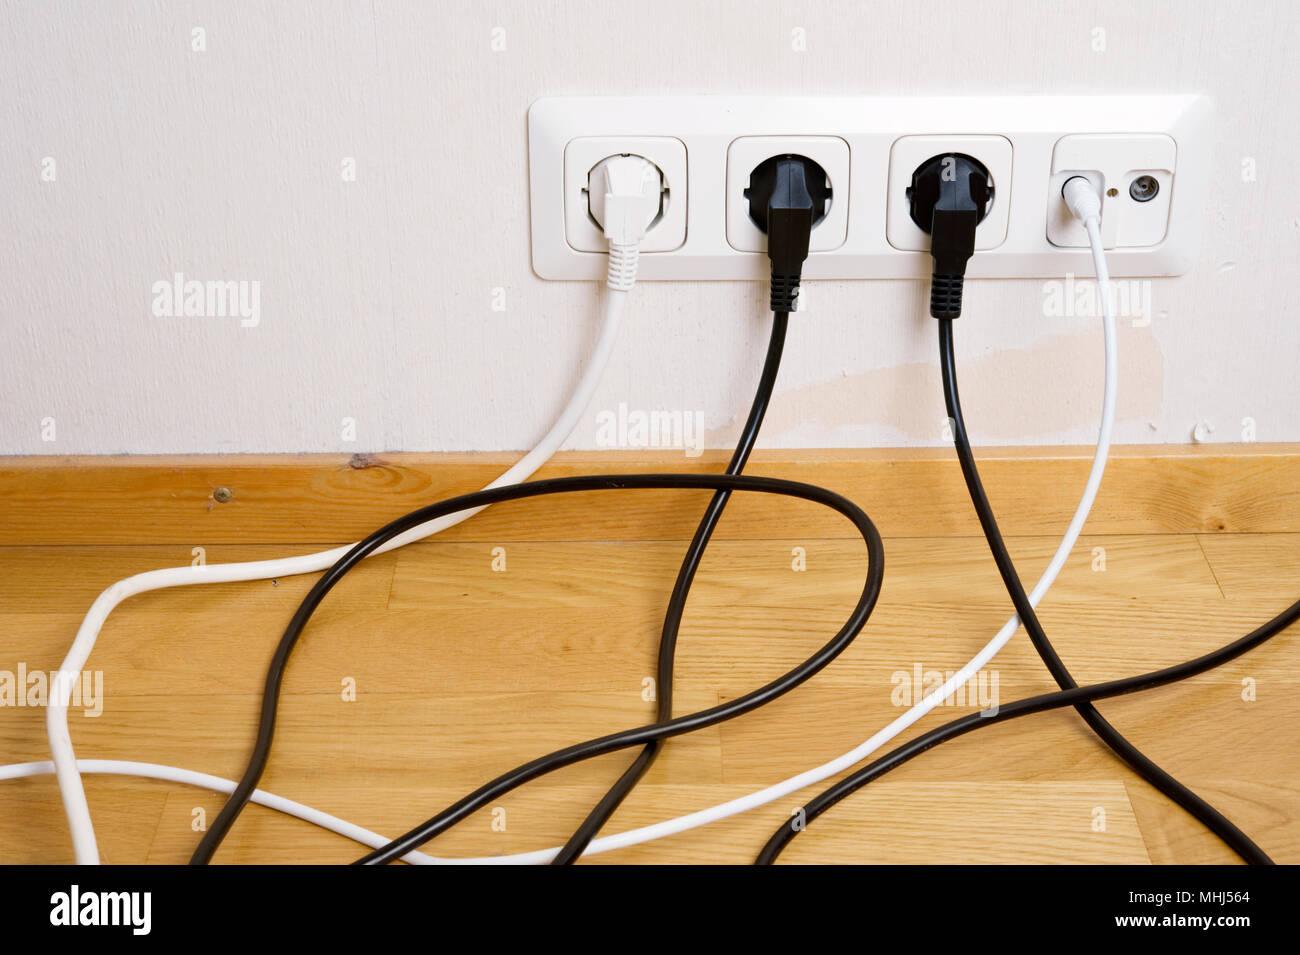 Electric and aerial outlet sockets, electric plugs and cables. Stock Photo